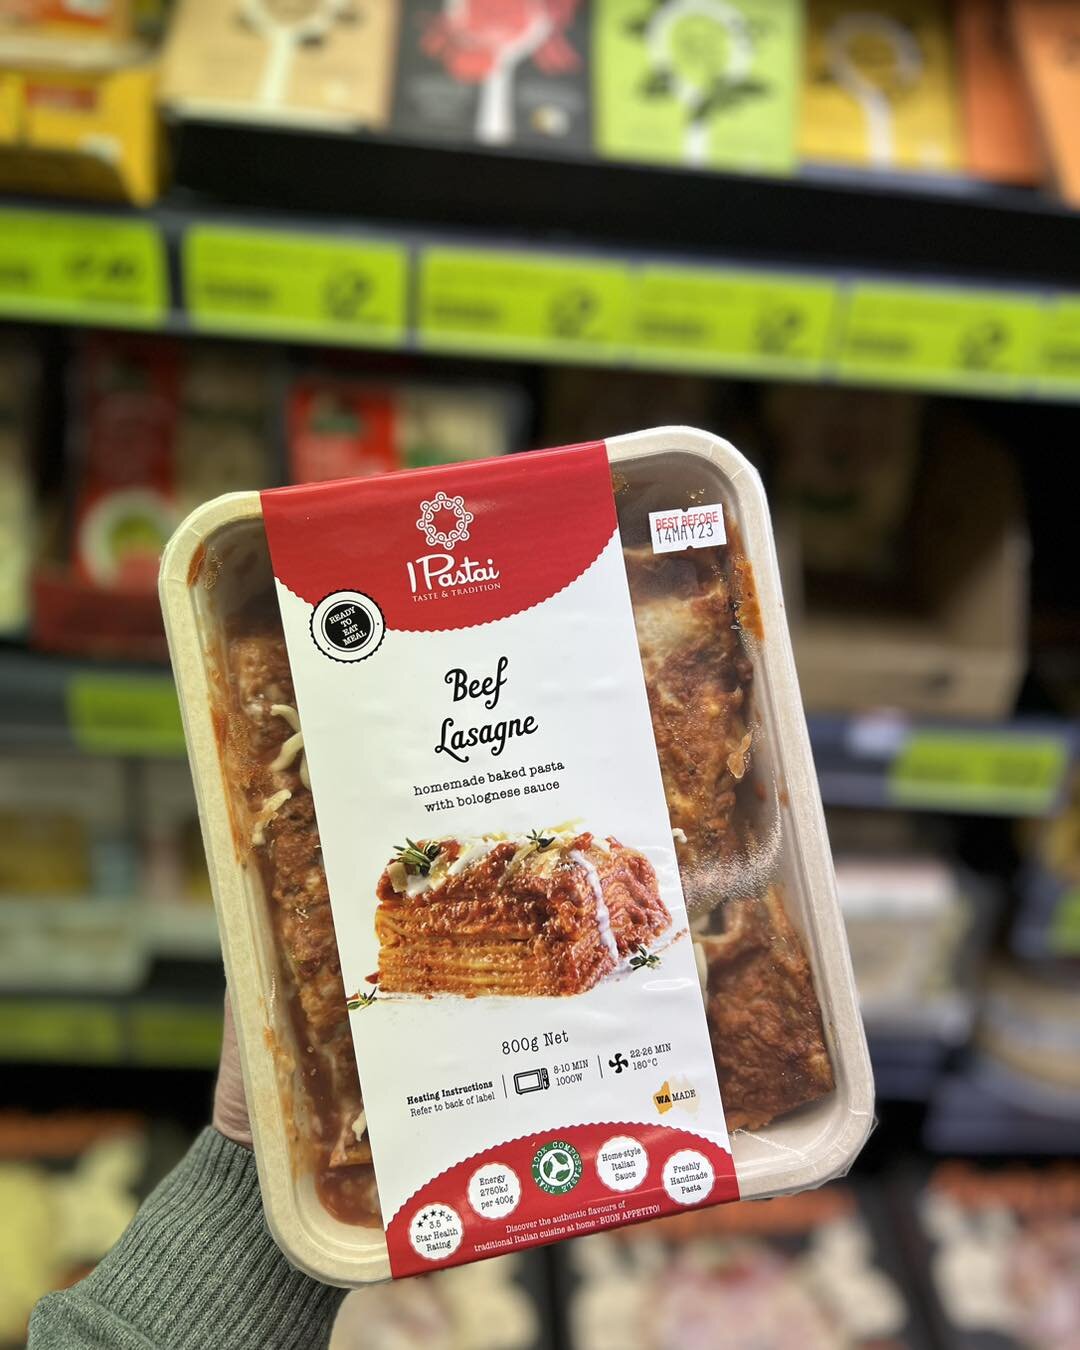 Looking for an easy dinner idea. Have you tried the I Pastai Beef Lasagna? The 800g serving makes it perfect to share. 

#southbunburymarketplace #sbmarketplace #yourlocalmarketplace #buywesteatbest #supportlocal #freshandlocal #fresh #themarketplace